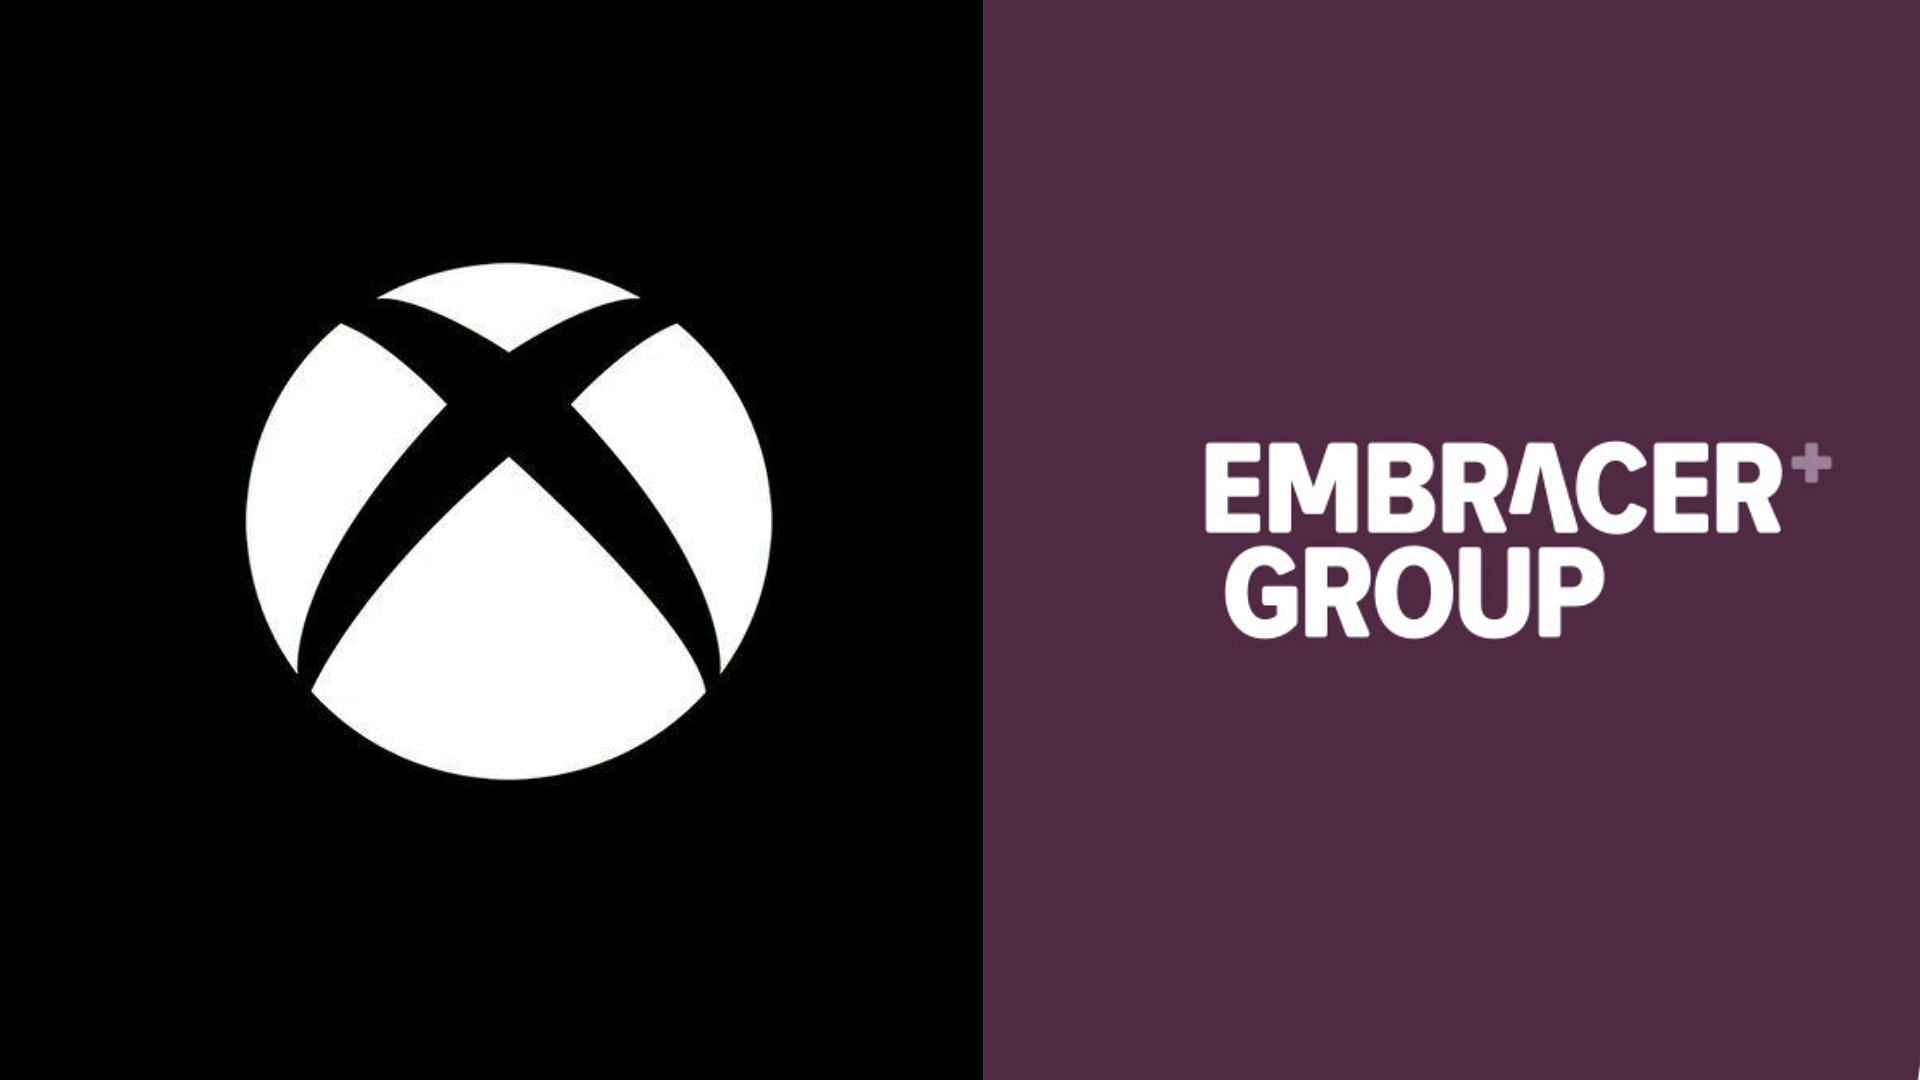 Xbox and Embracer Group cuts is a stark reminder of the danegers associated with bigger publishers acquiring smaller studios (Image via Xbox, Embracer Group on X)